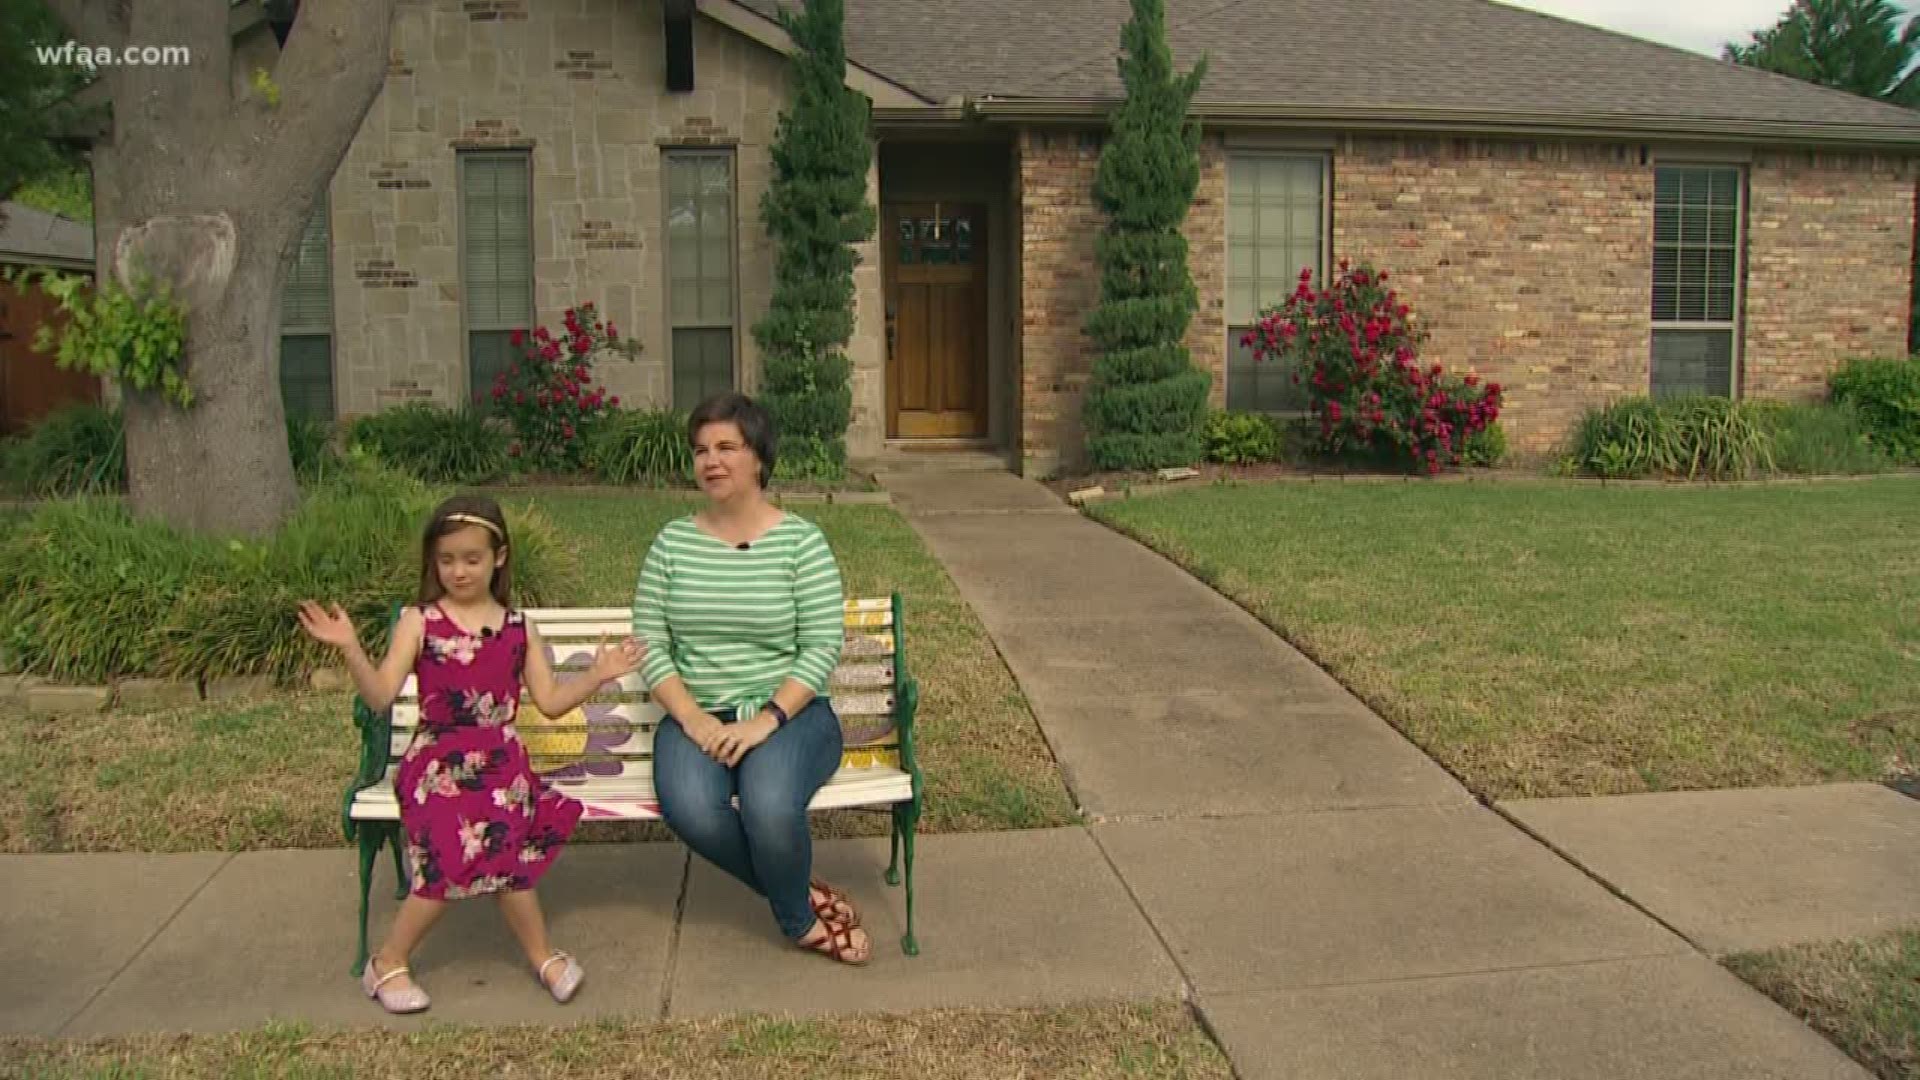 It was the keen eye of a 7-year-old that spotted a missing bench that was beloved by a neighborhood in McKinney.